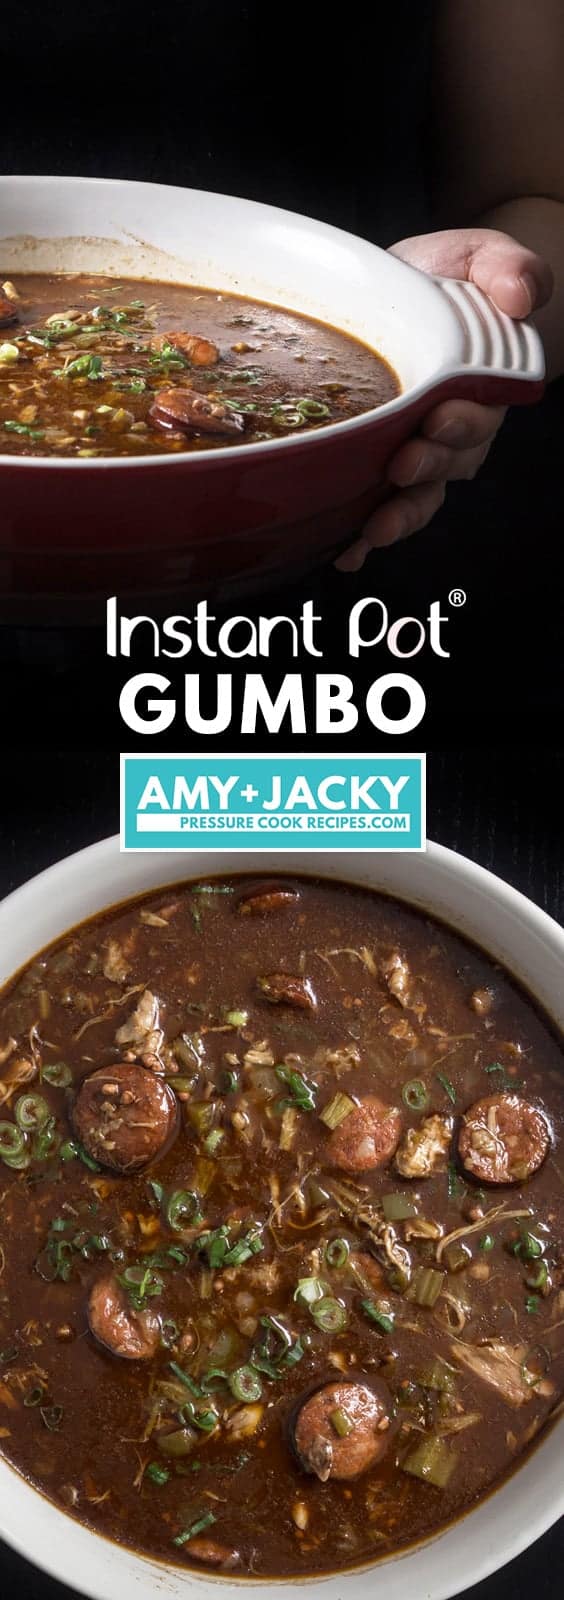 Instant Pot Gumbo Recipe (Pressure Cooker Gumbo): make mouthwatering Southern Louisiana pot of love packed with smoky-spicy Cajun, Creole flavors and rich aromas. Feed your crowd with this delicious party favorite - not just for Mardi Gras! #instantpot #instantpotrecipes #pressurecooker #gumbo #southernrecipes